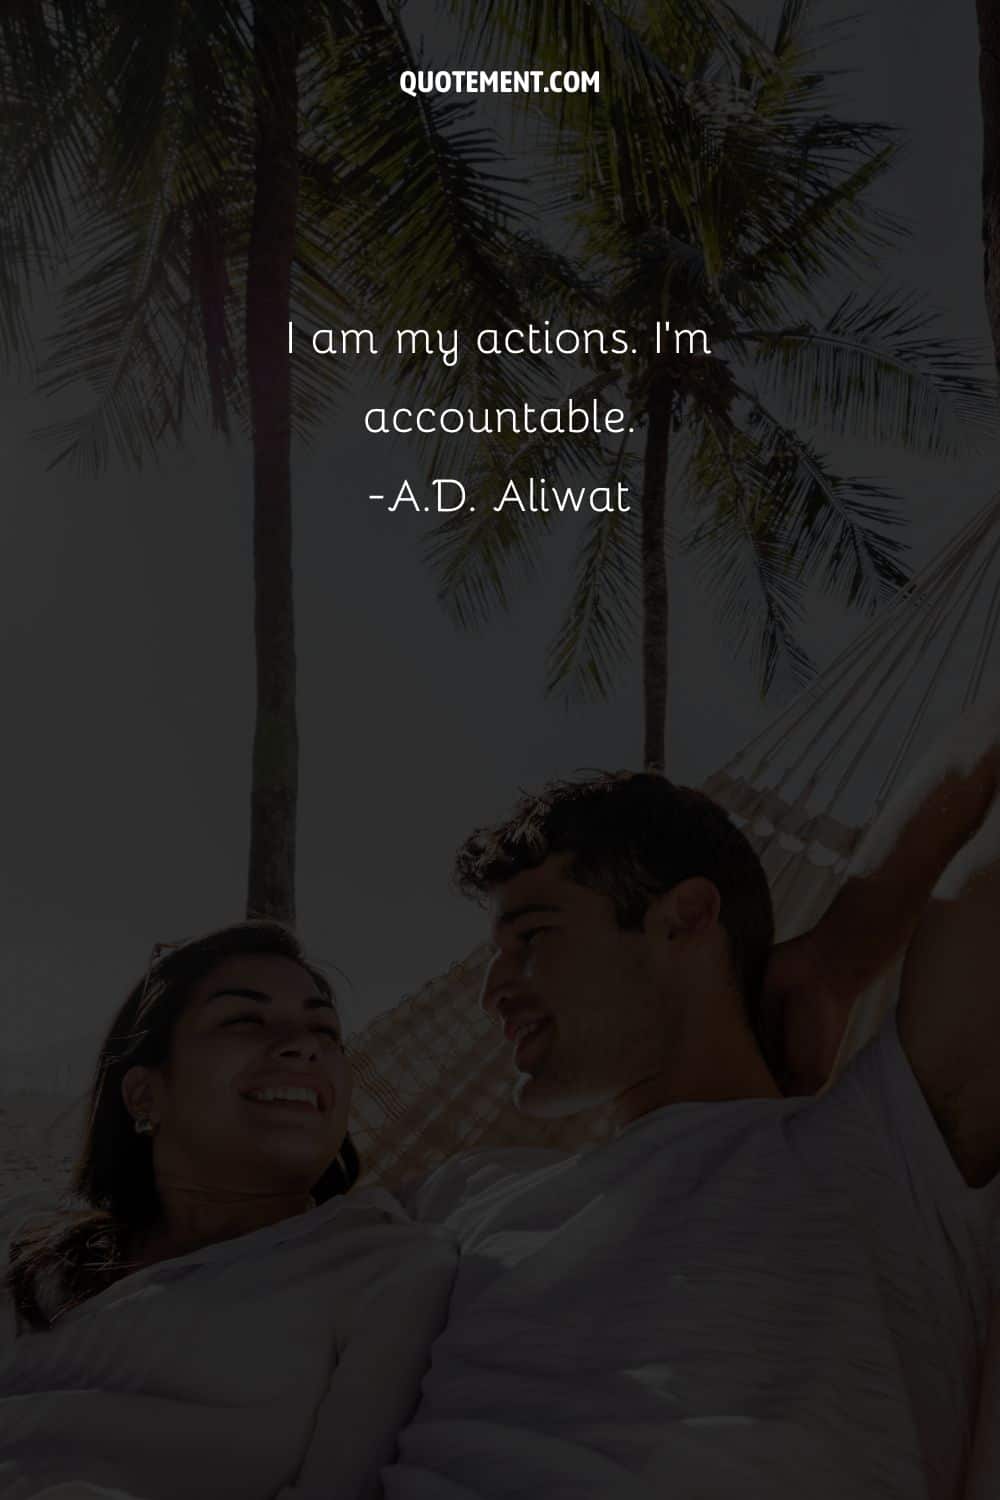 I am my actions. I’m accountable